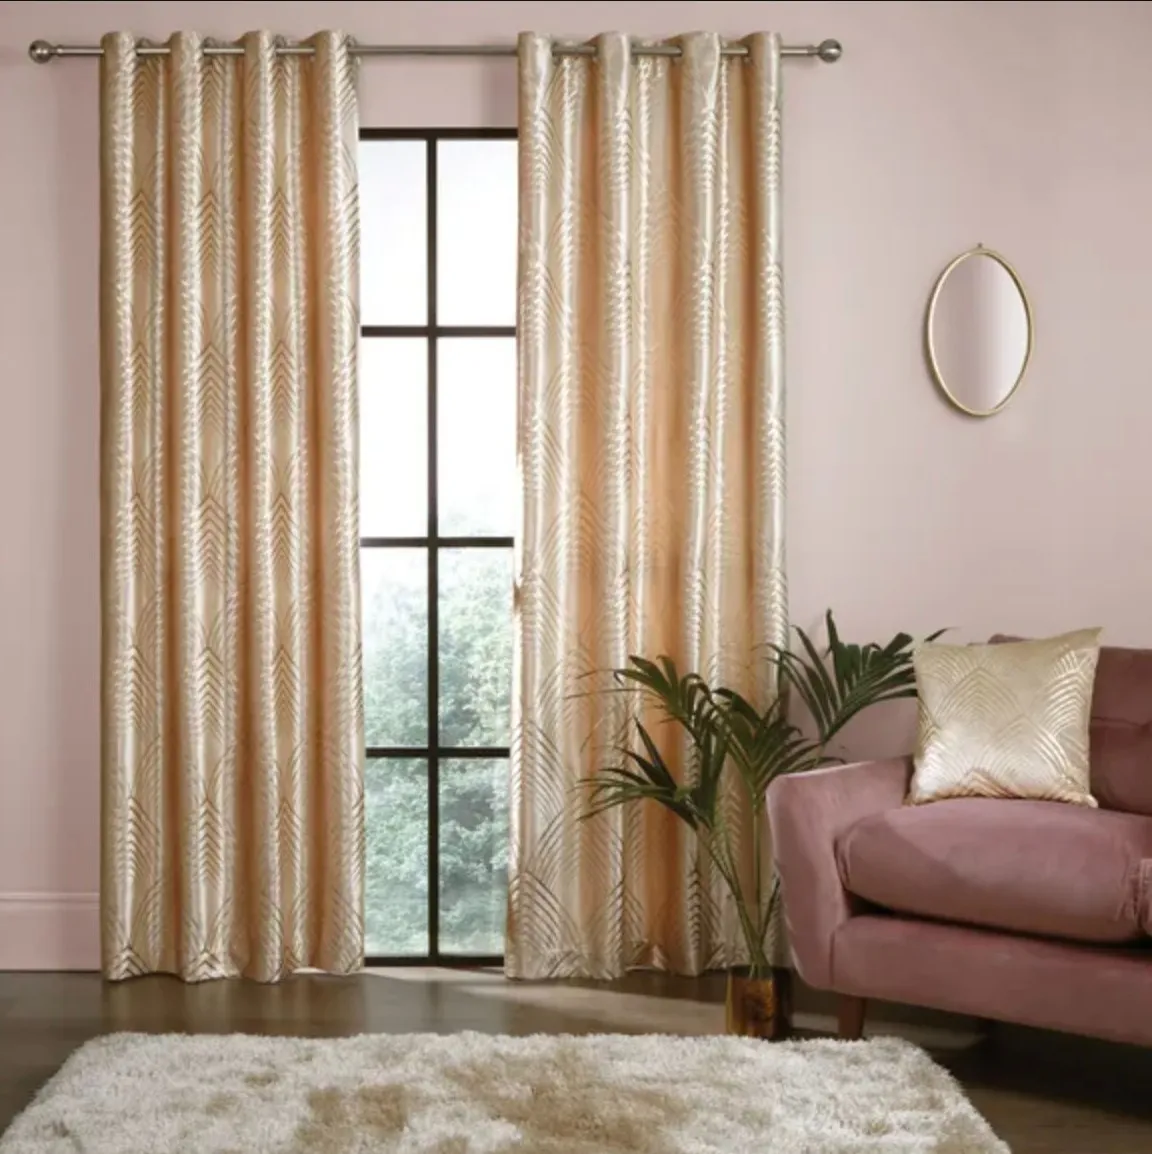 Gold curtains in a room with pink walls